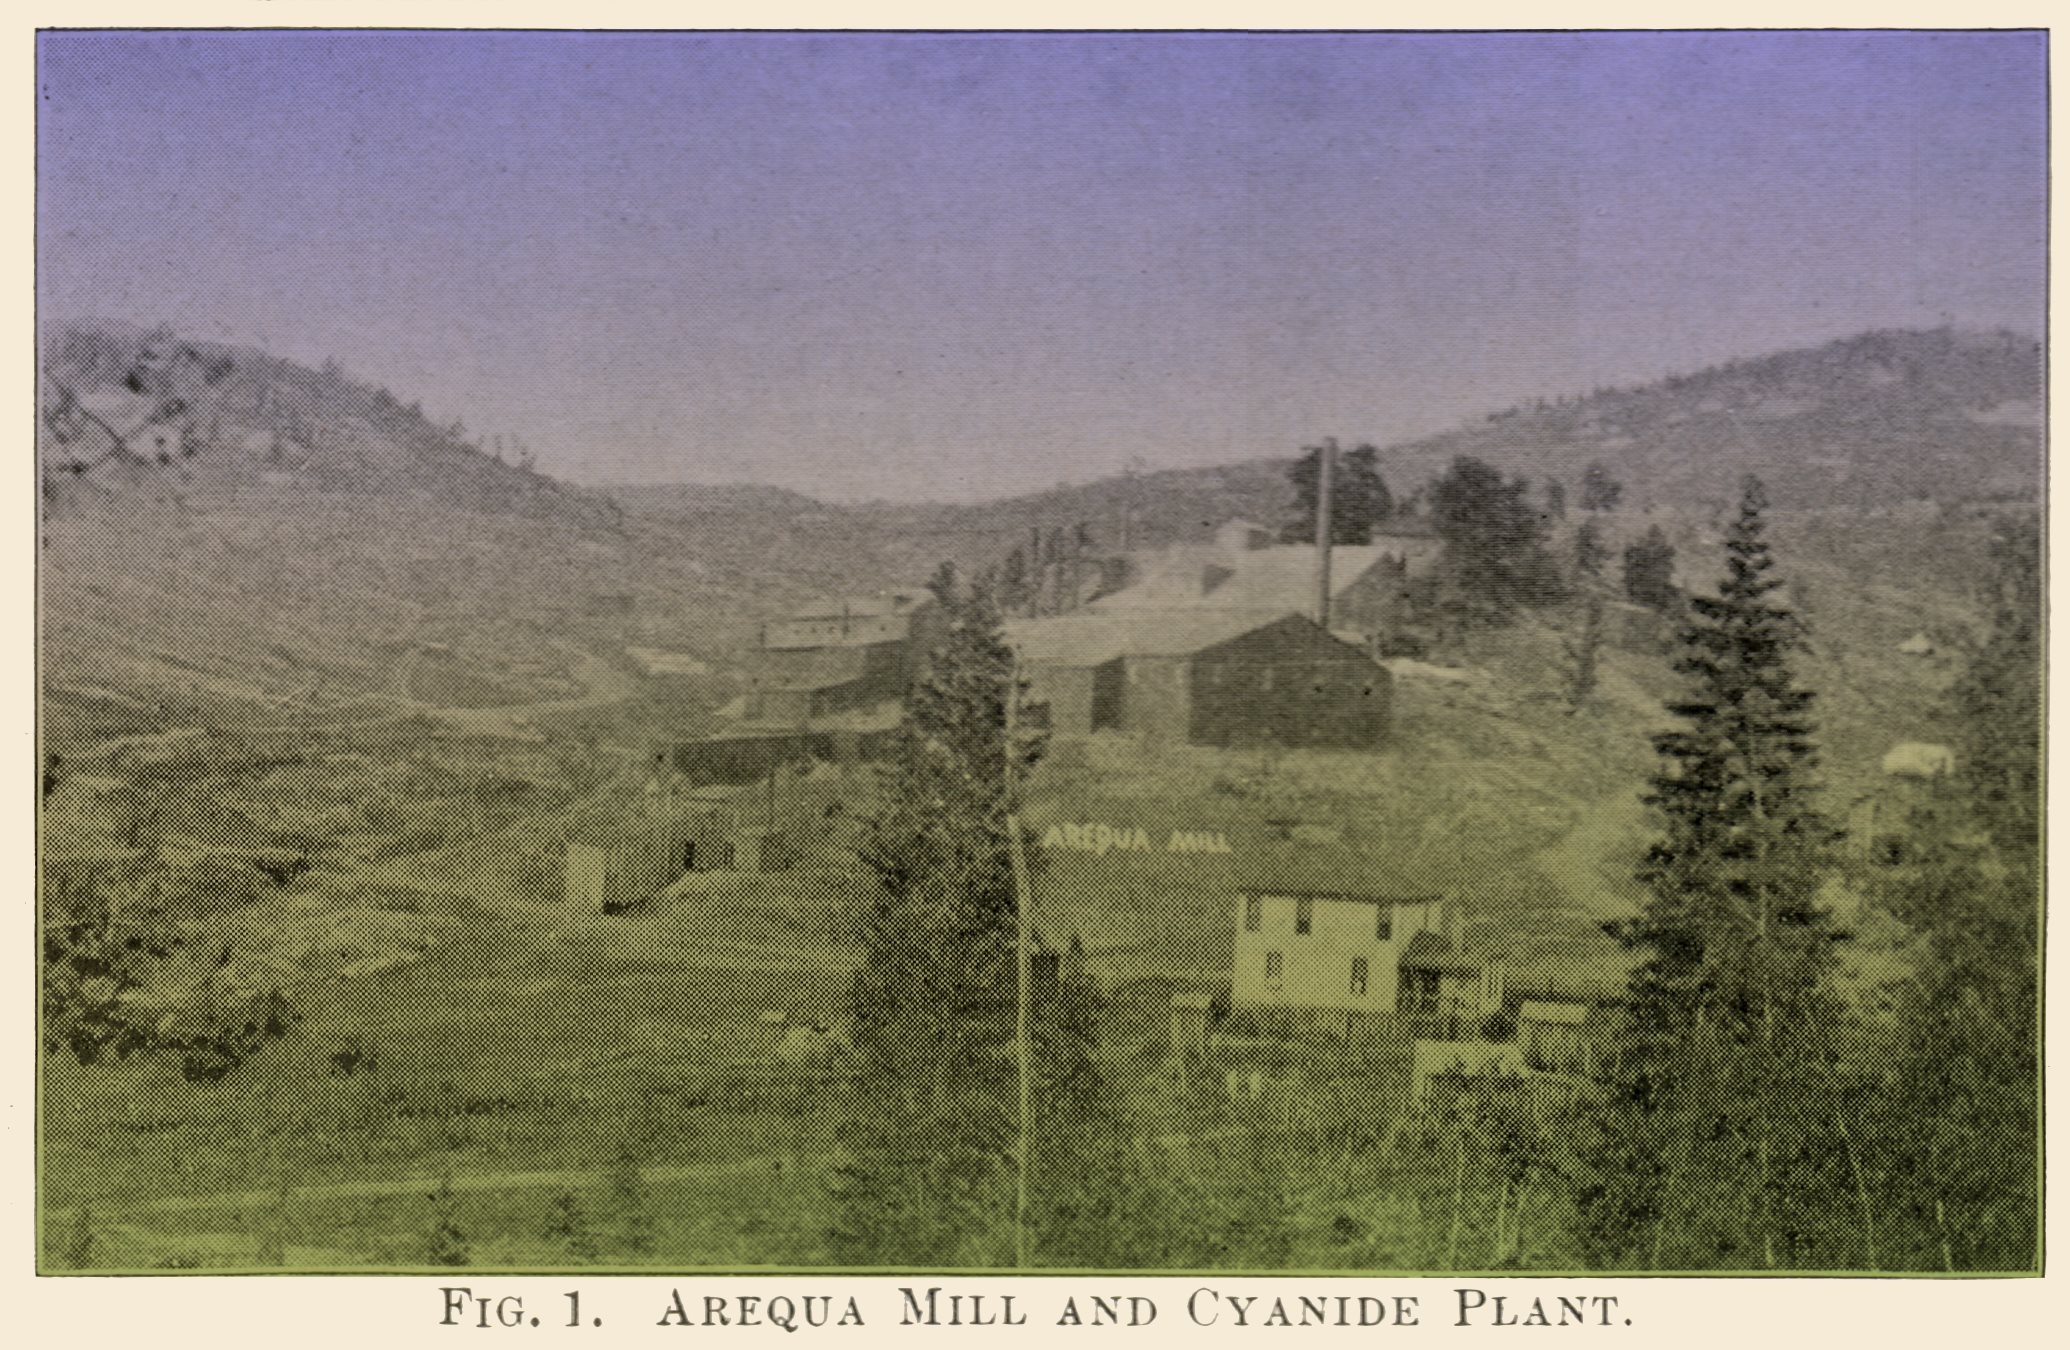 This sadly quite bad view, not direct made better with my fiddling with it in terms of some coloring, shows how the Arequa Mill lays on the hill as seen from southeast. Appearing in an August 1899 issue this must been photographed before that time and being said to have been erected around 1896/1897 the timespan is not that large.
   Beacon Hill is seen on far left, not much else to go on, quality of the printed image is not good, and while I can get closer due to this being a larger pixel size view, it still is a not particular image.